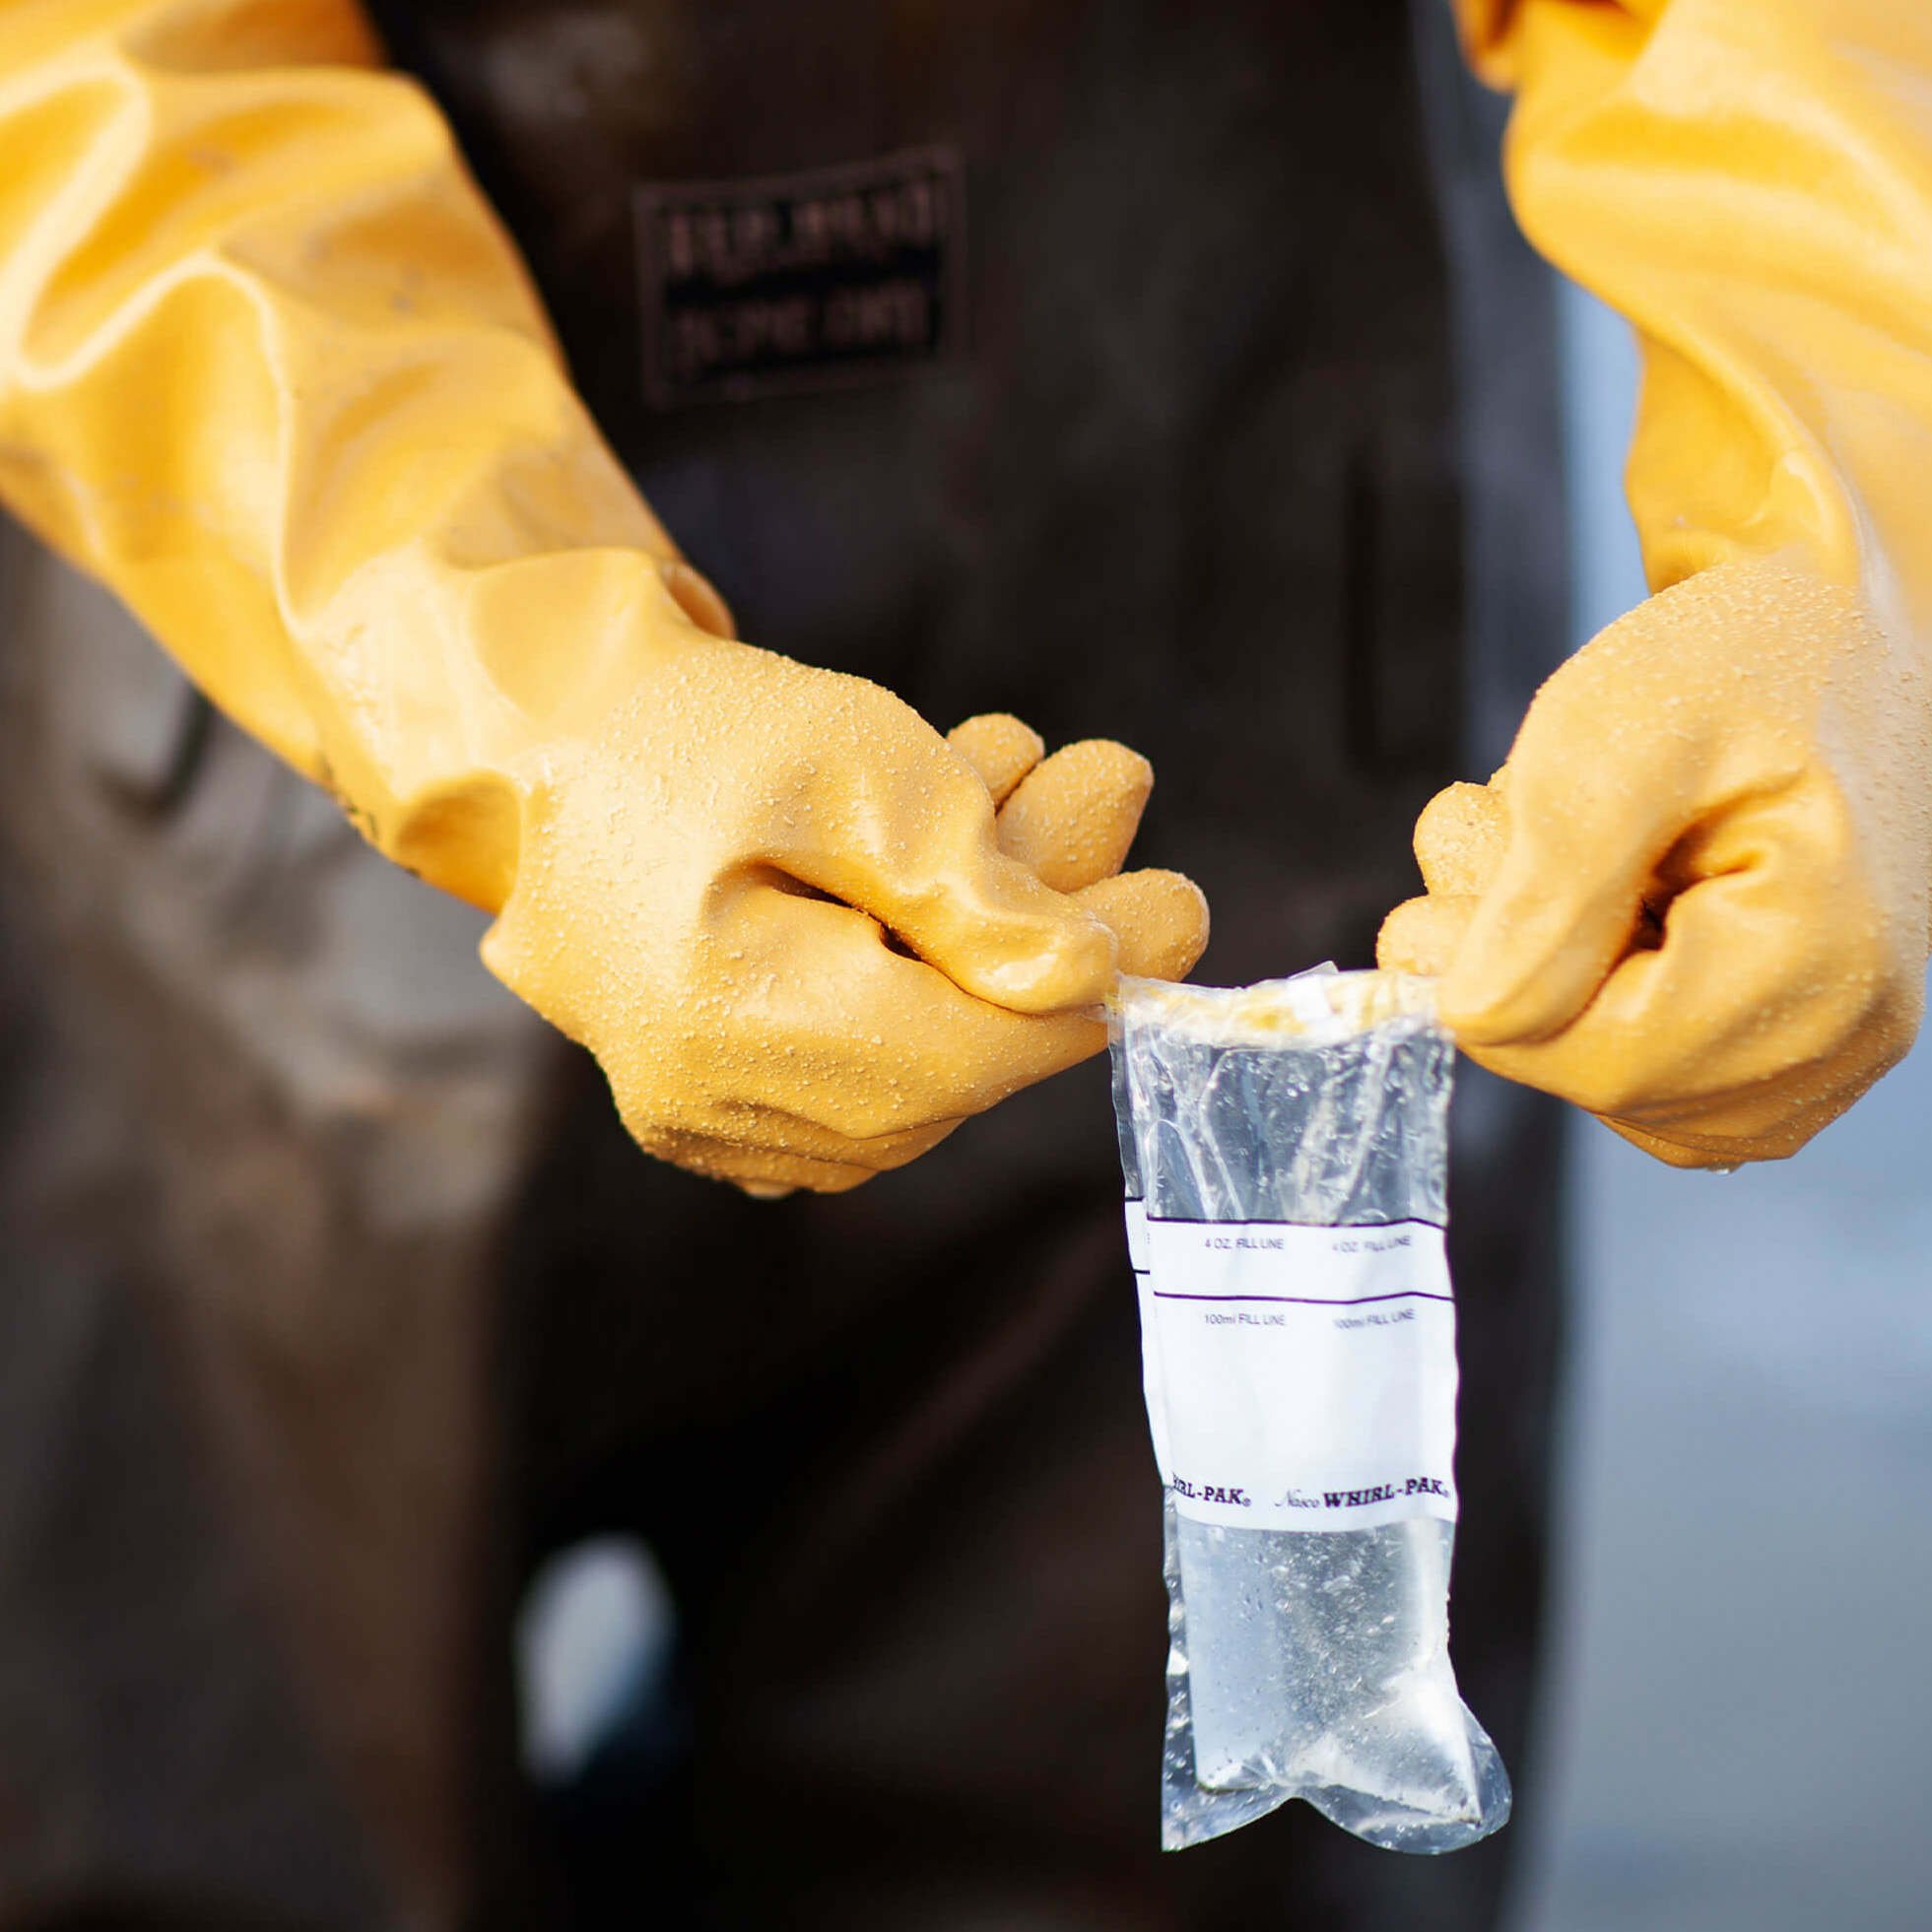 Hands with yellow gloves holding a water test sample in a plastic bag